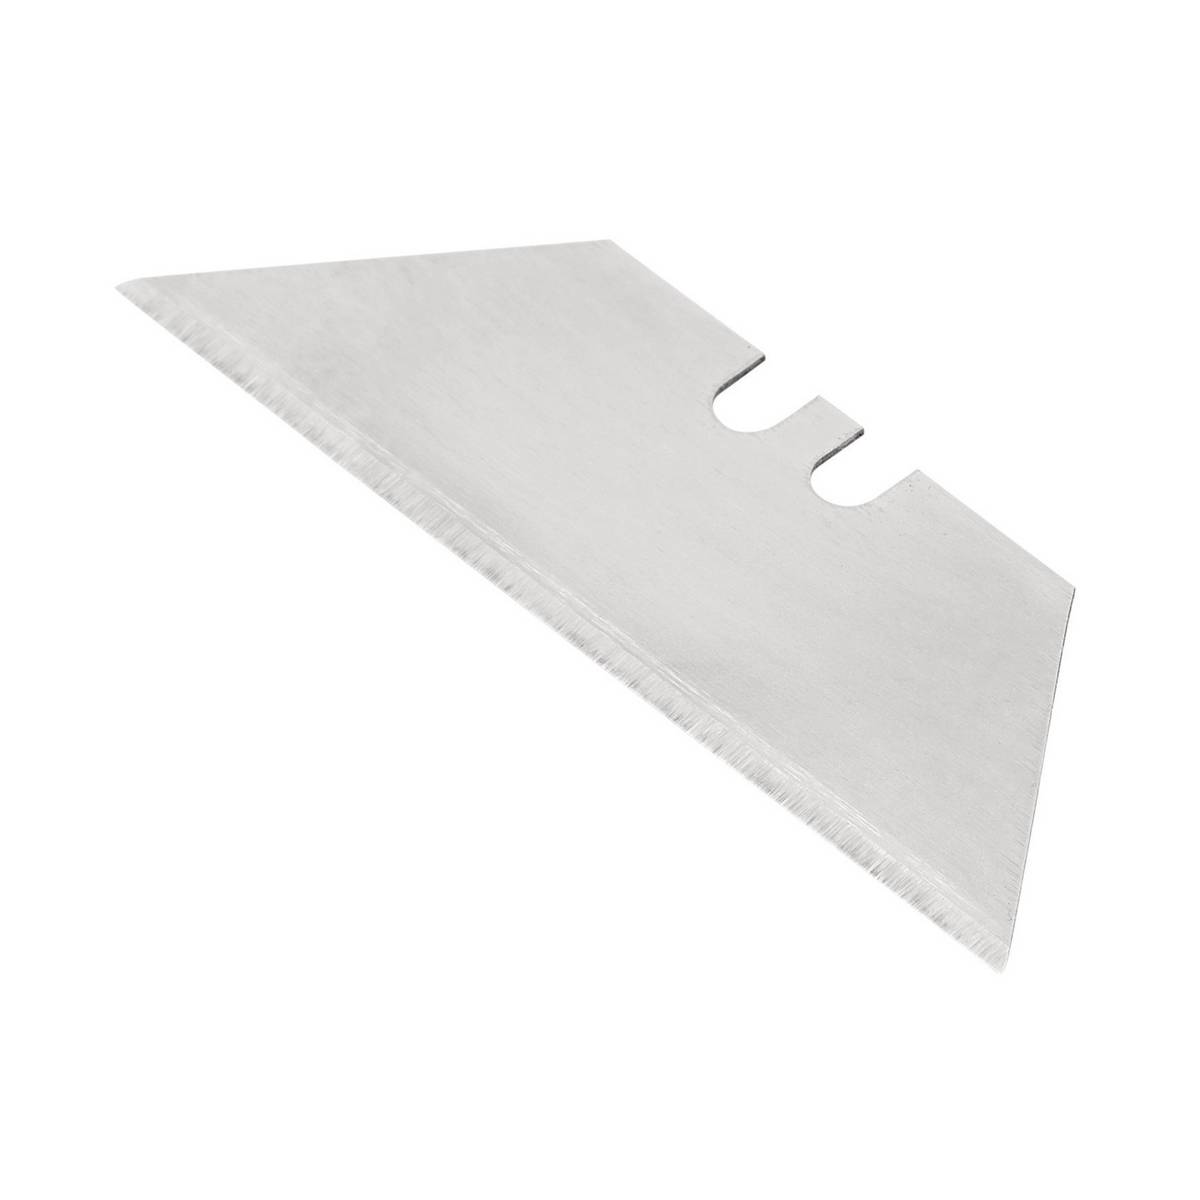 DRAPER HEAVY DUTY TRIMMING KNIFE BLADES (PACK OF 10)